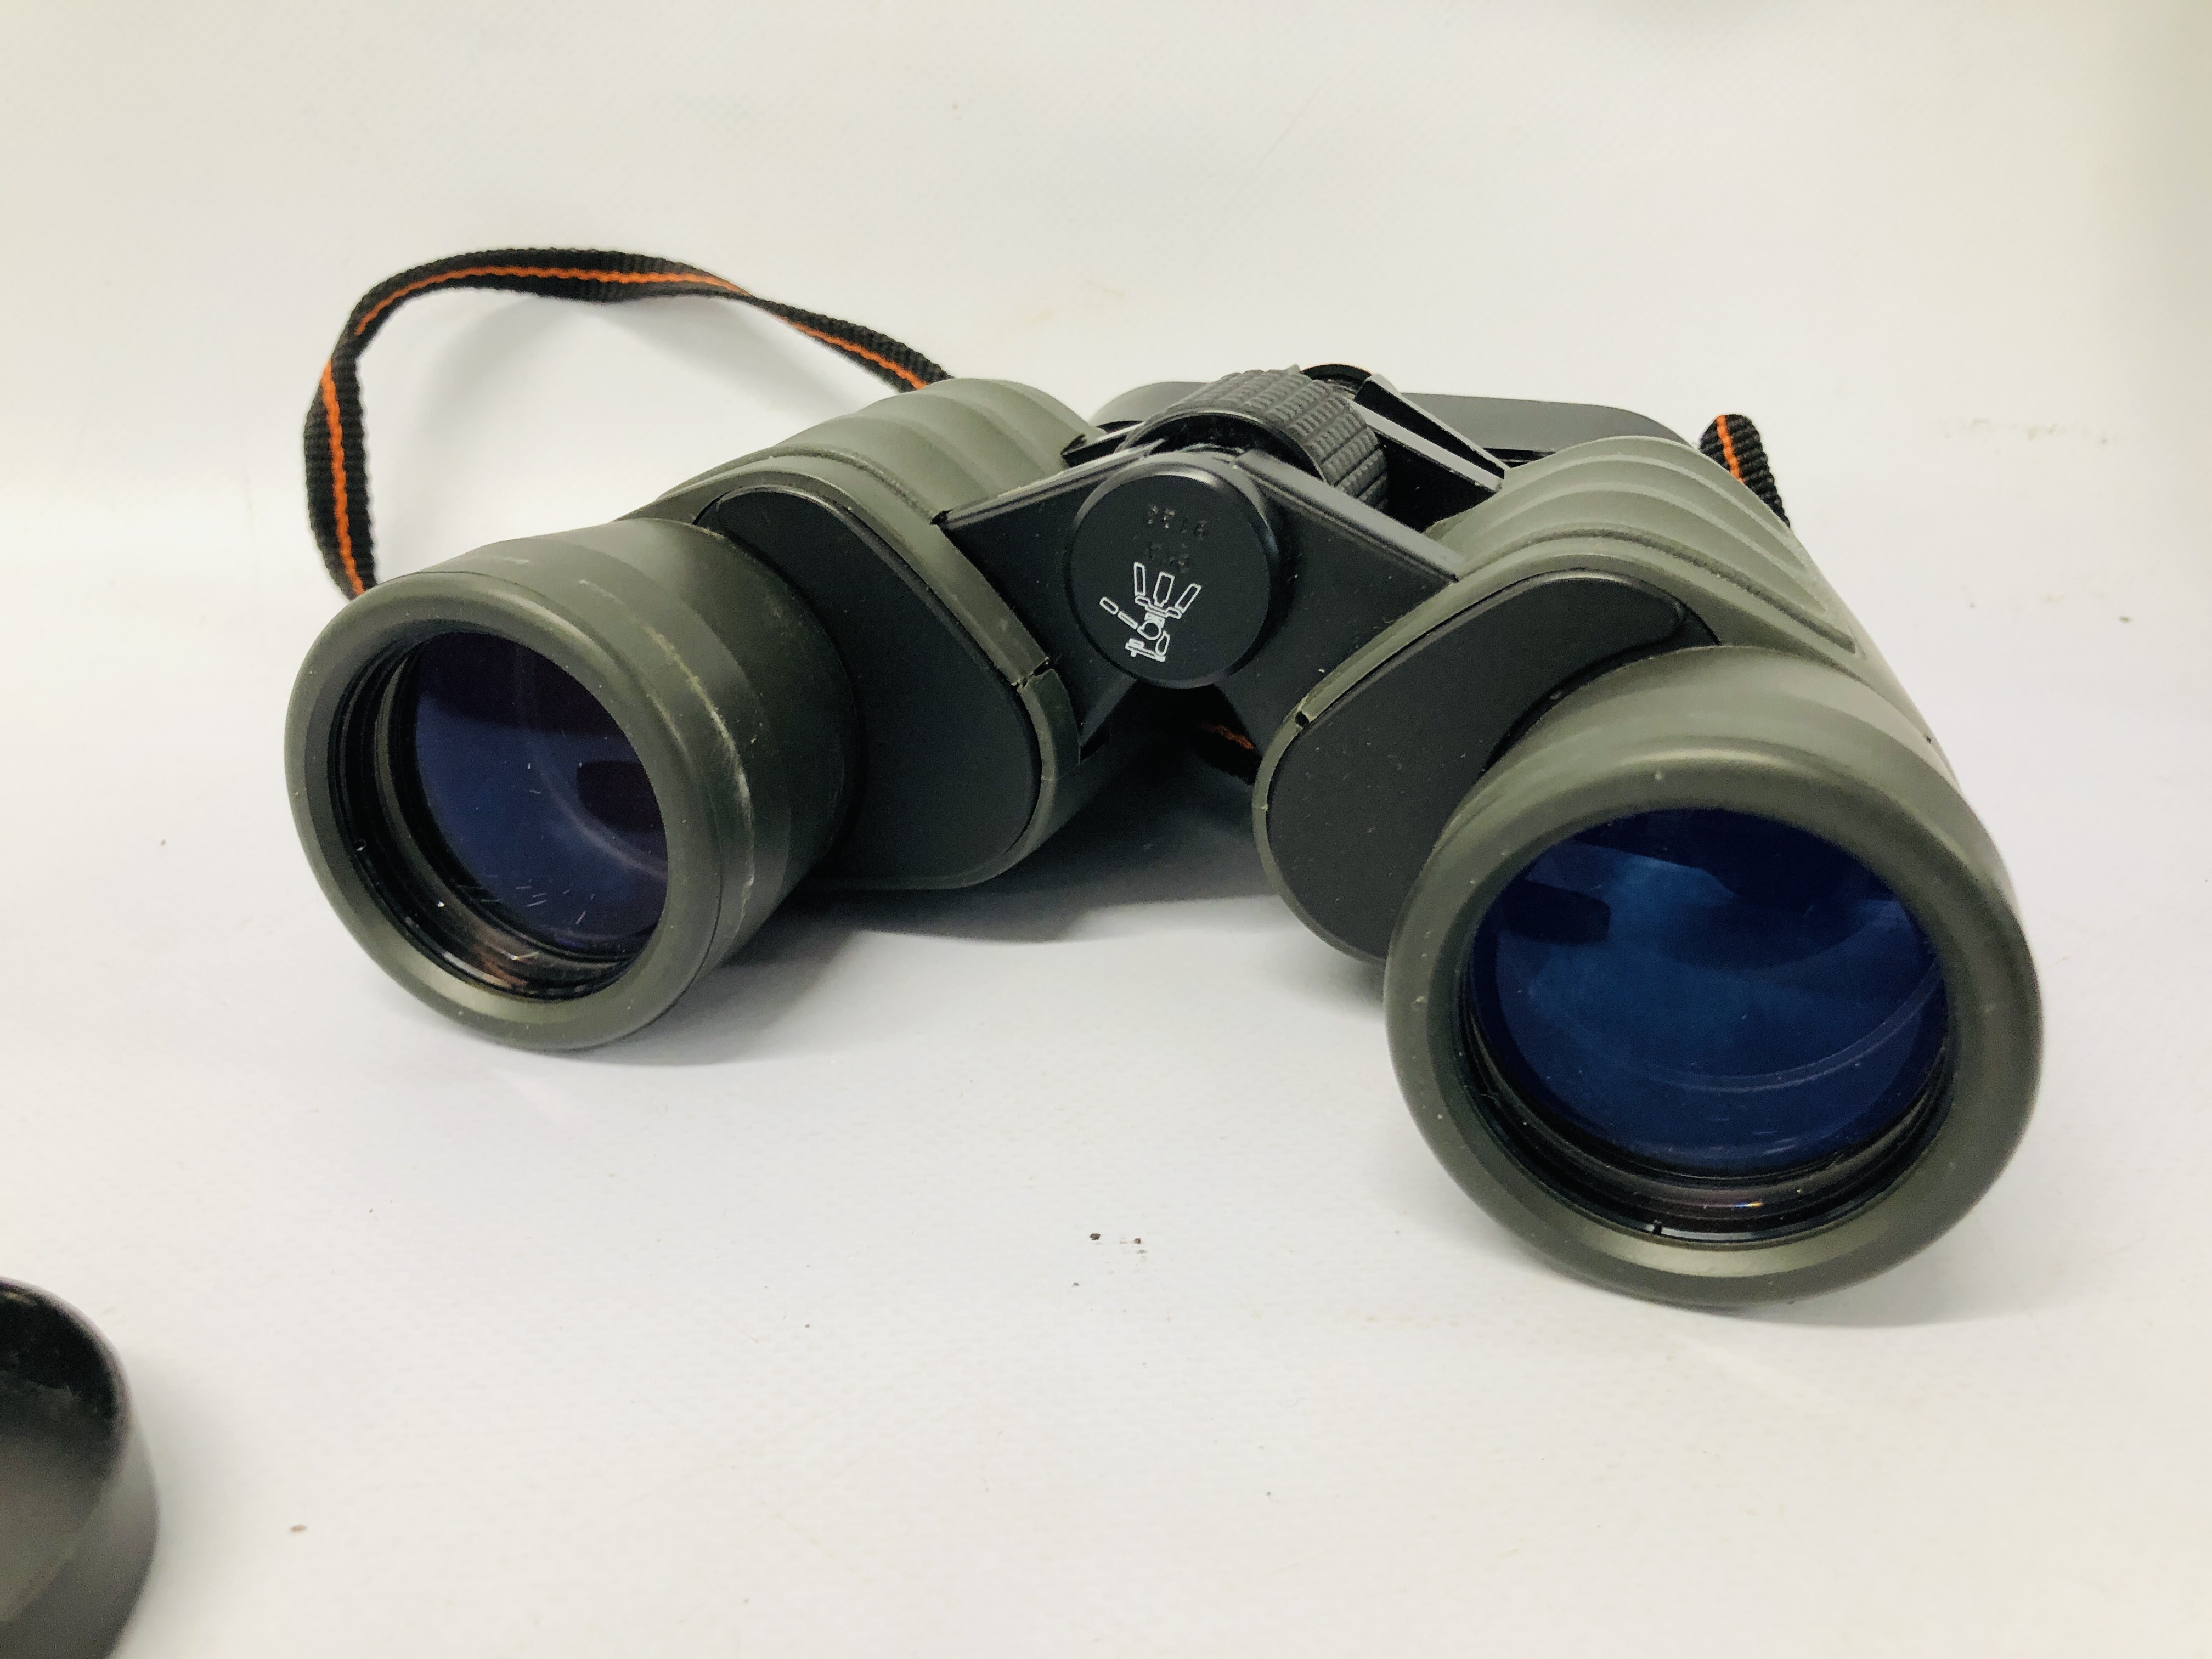 PAIR OF BRESSER 8 X 40 BINOCULARS WITH CASE ALONG WITH A PAIR OF VISTA QUEST BINOCULARS AND CASE - Image 5 of 11